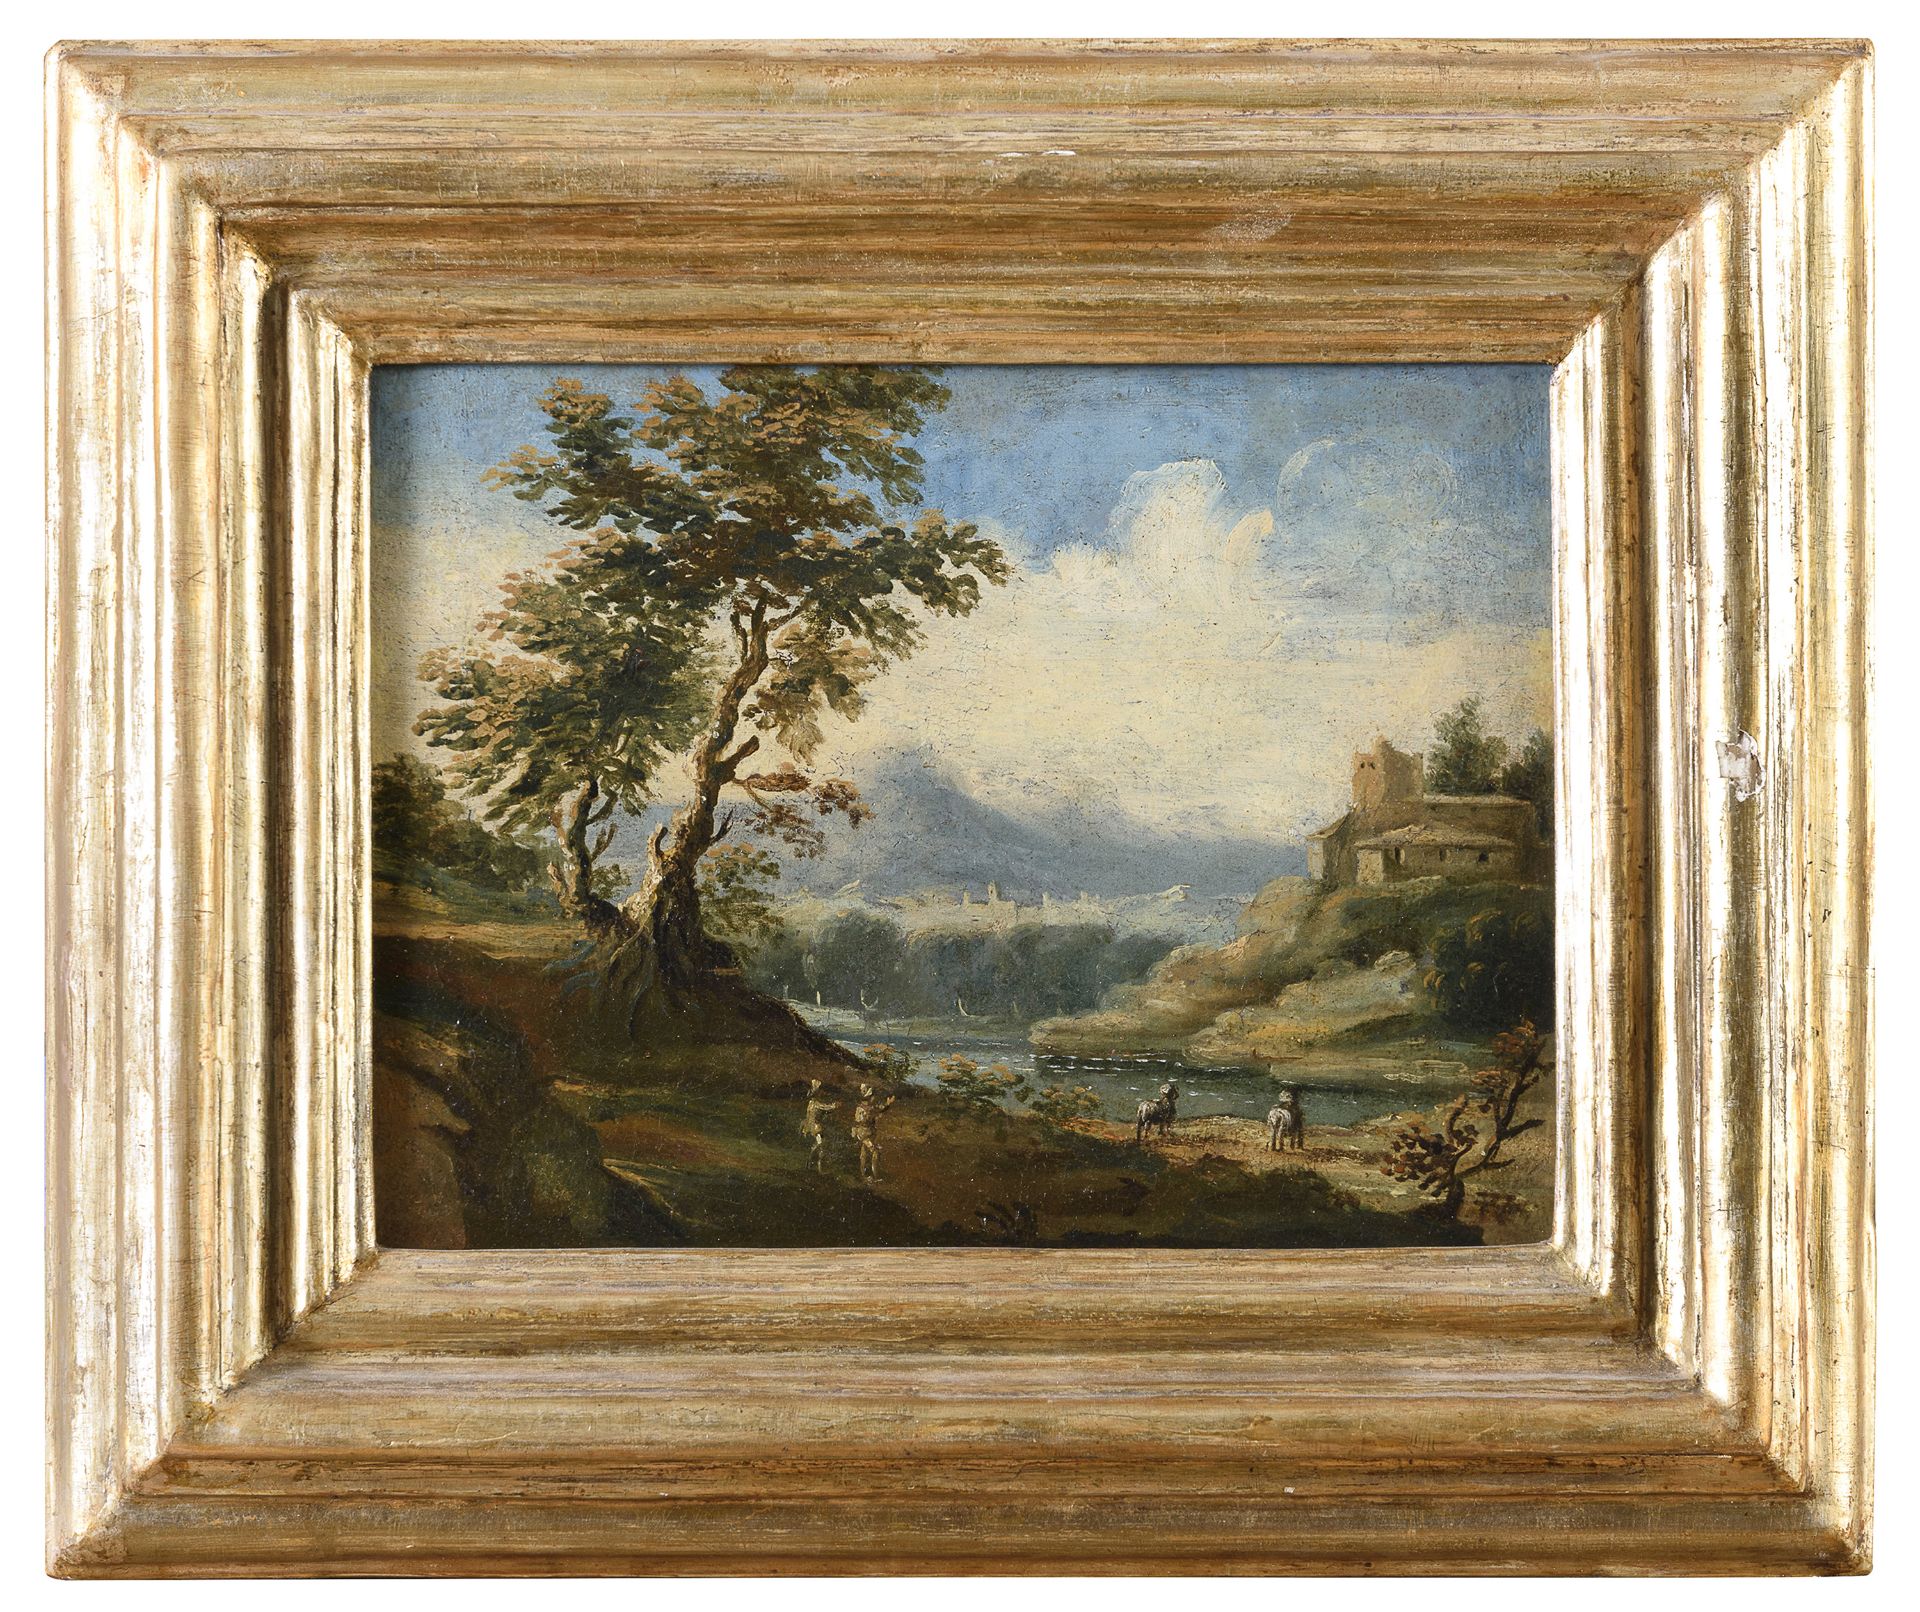 PAIR OF OIL LANDSCAPES BY THE CIRCLE OF ALESSIO DE MARCHIS 18TH CENTURY